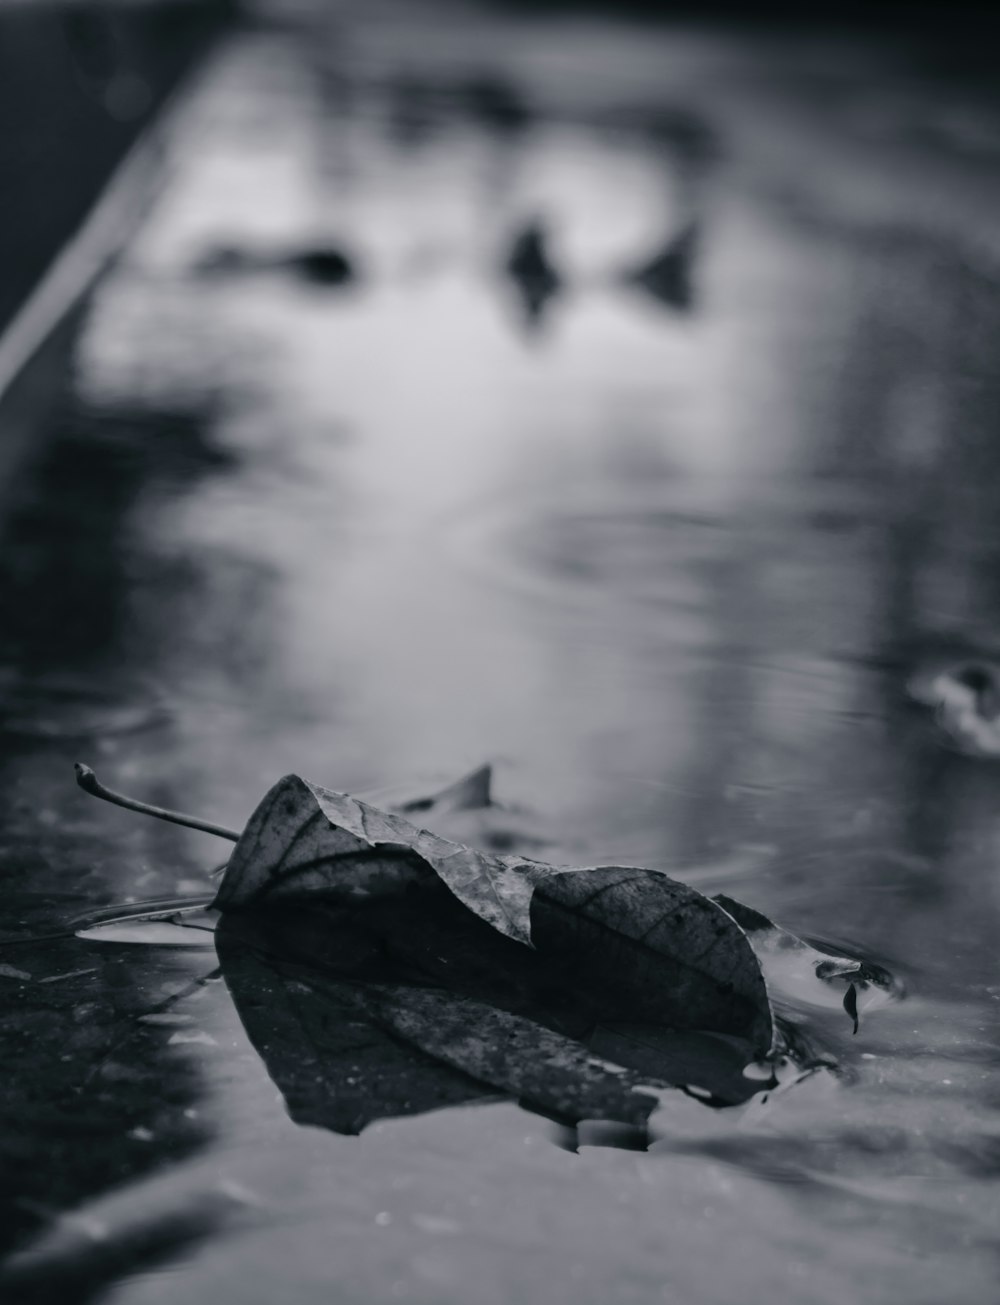 grayscale photo of dried leaf on water